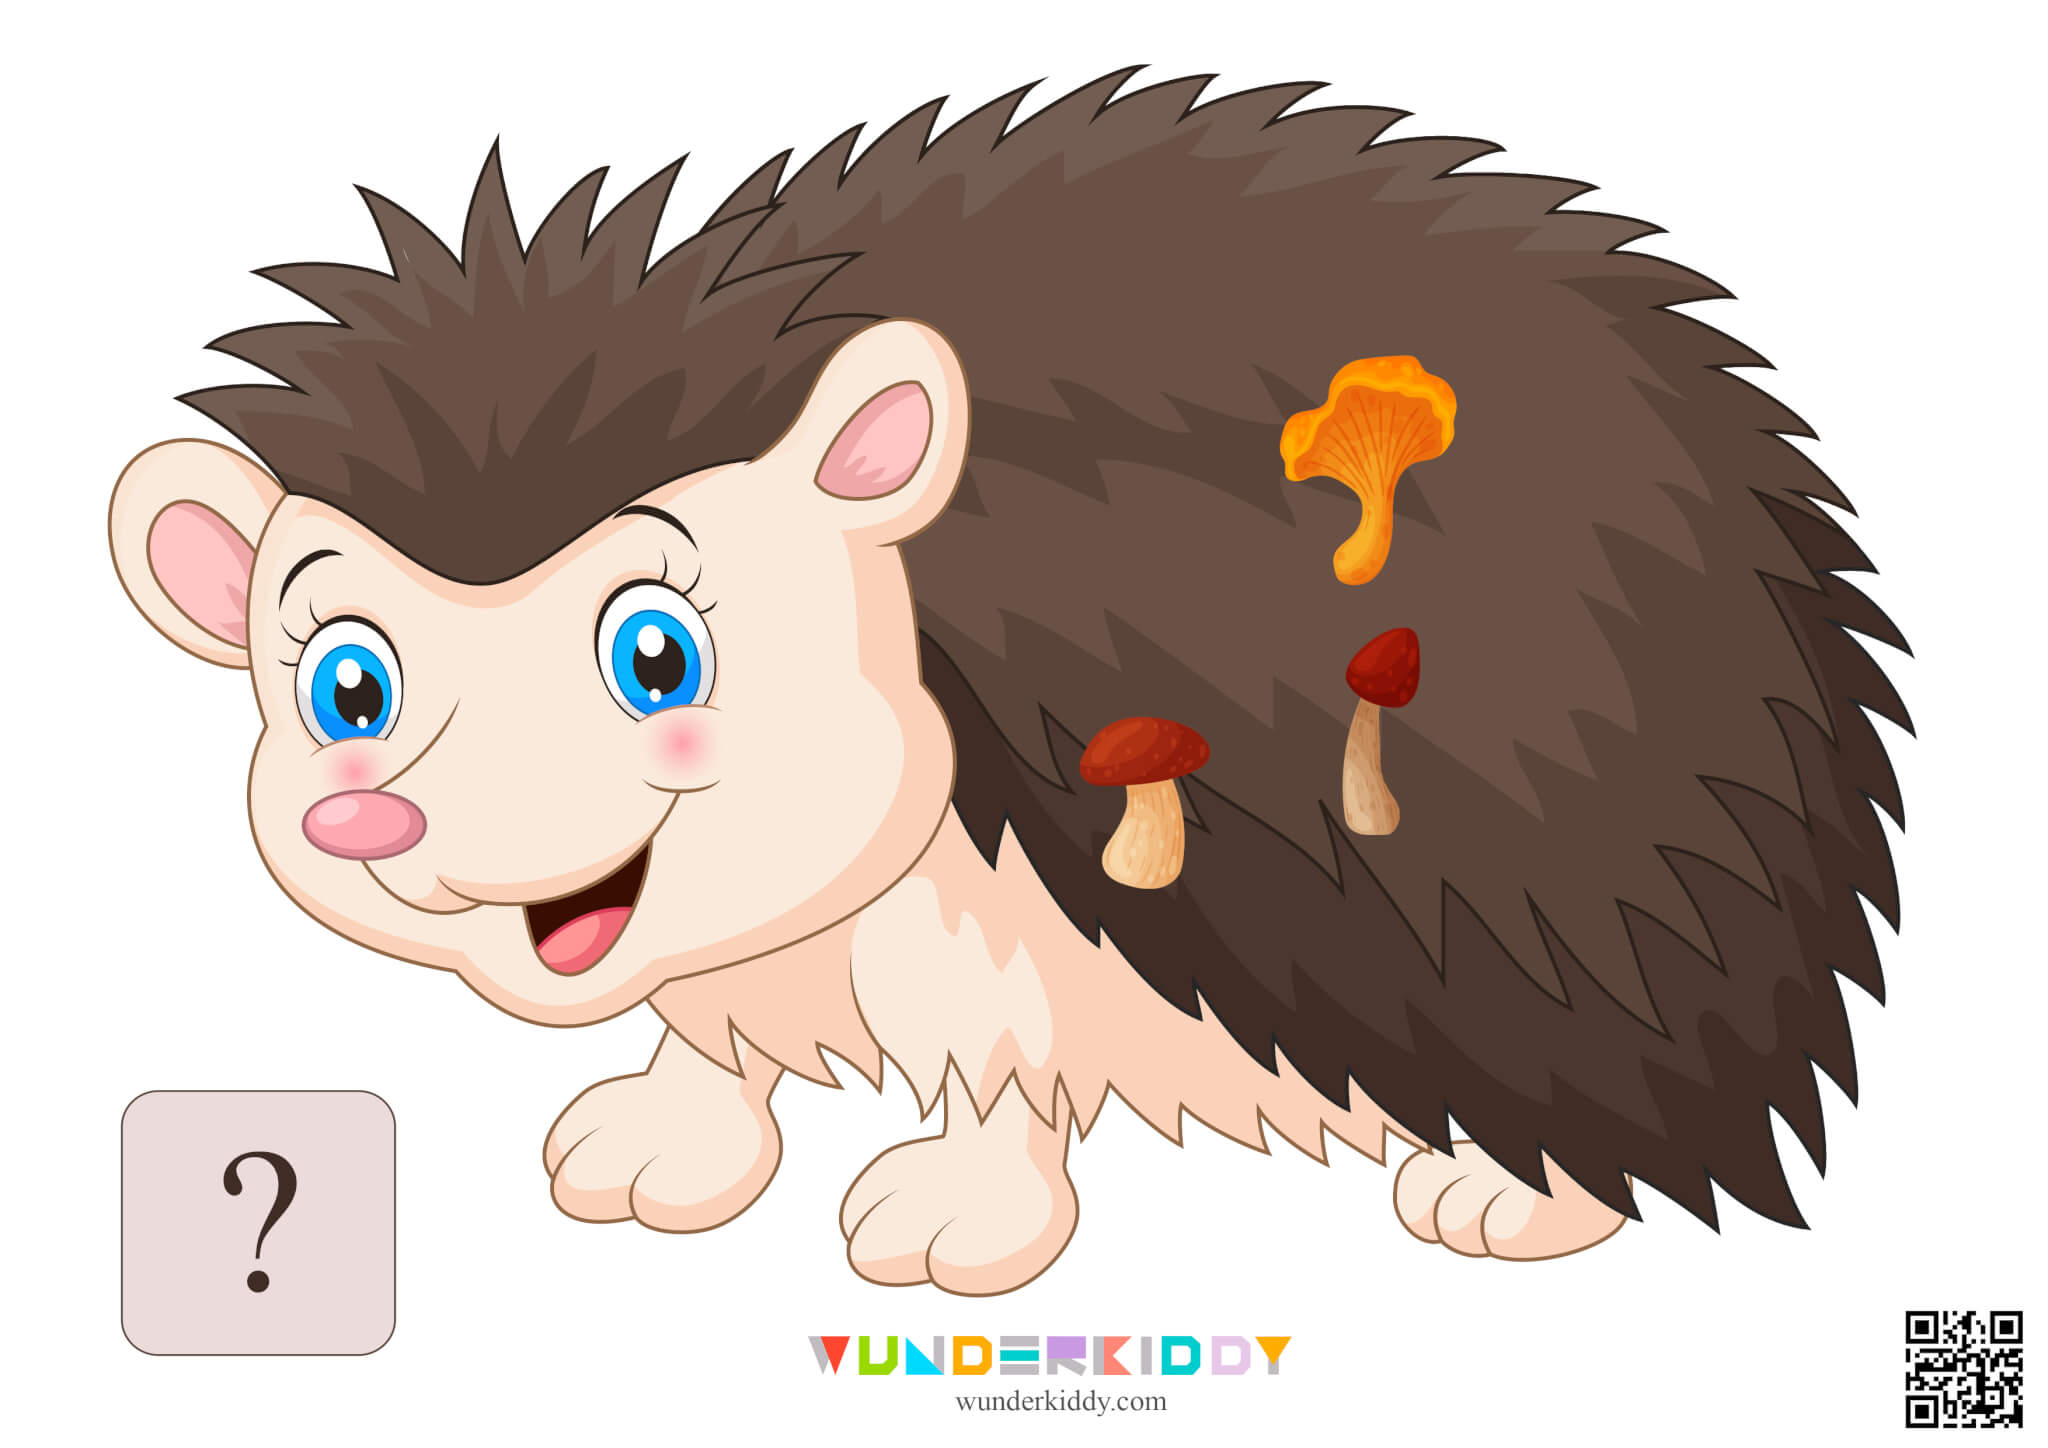 Worksheet Count to 20 with Hedgehog and Mushrooms - Image 7